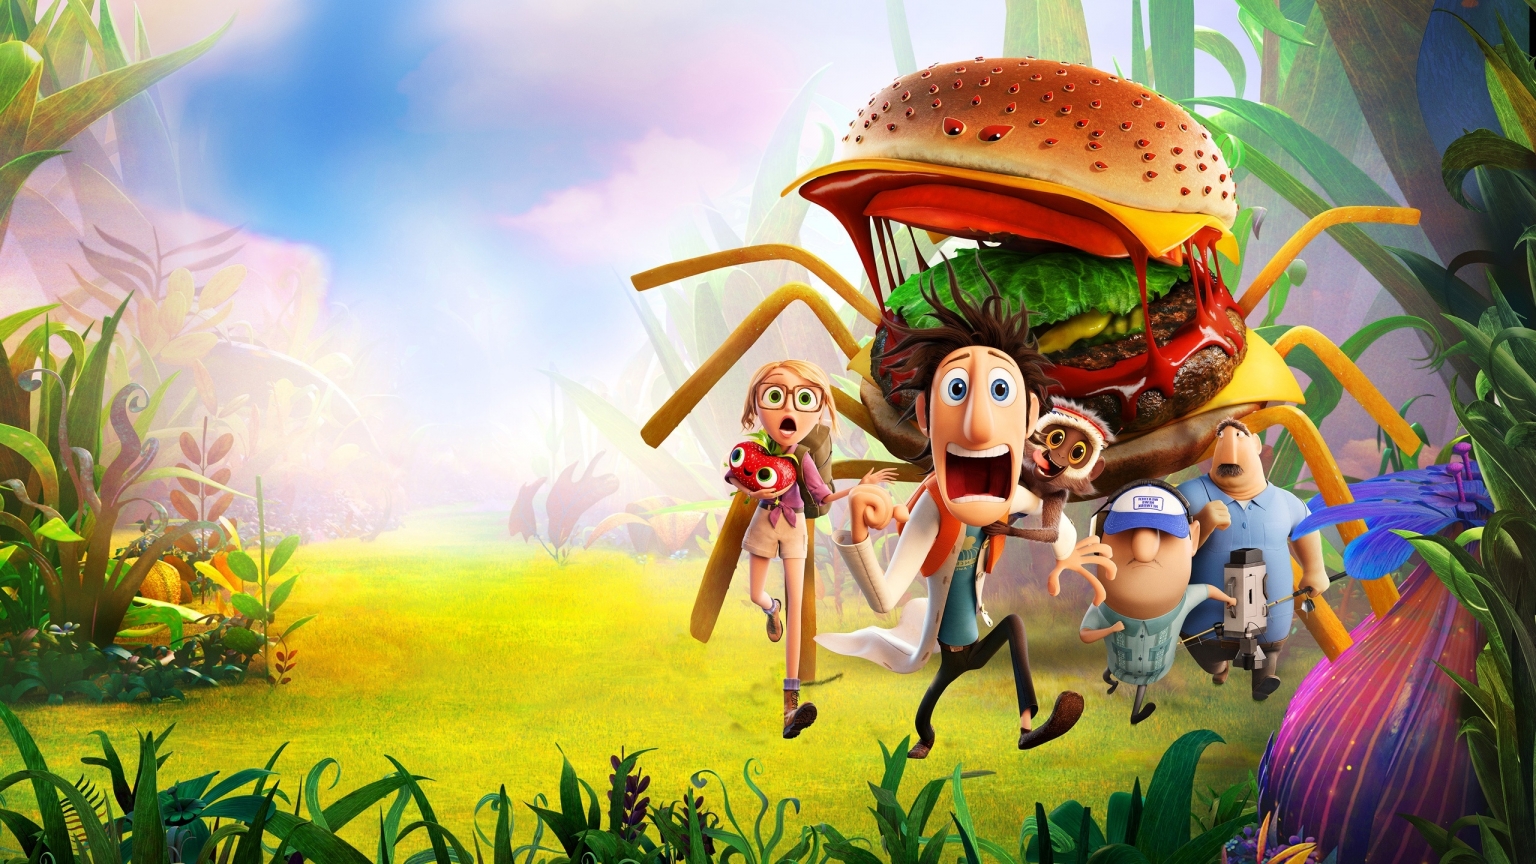 Cloudy with a chance of Meatballs for 1536 x 864 HDTV resolution